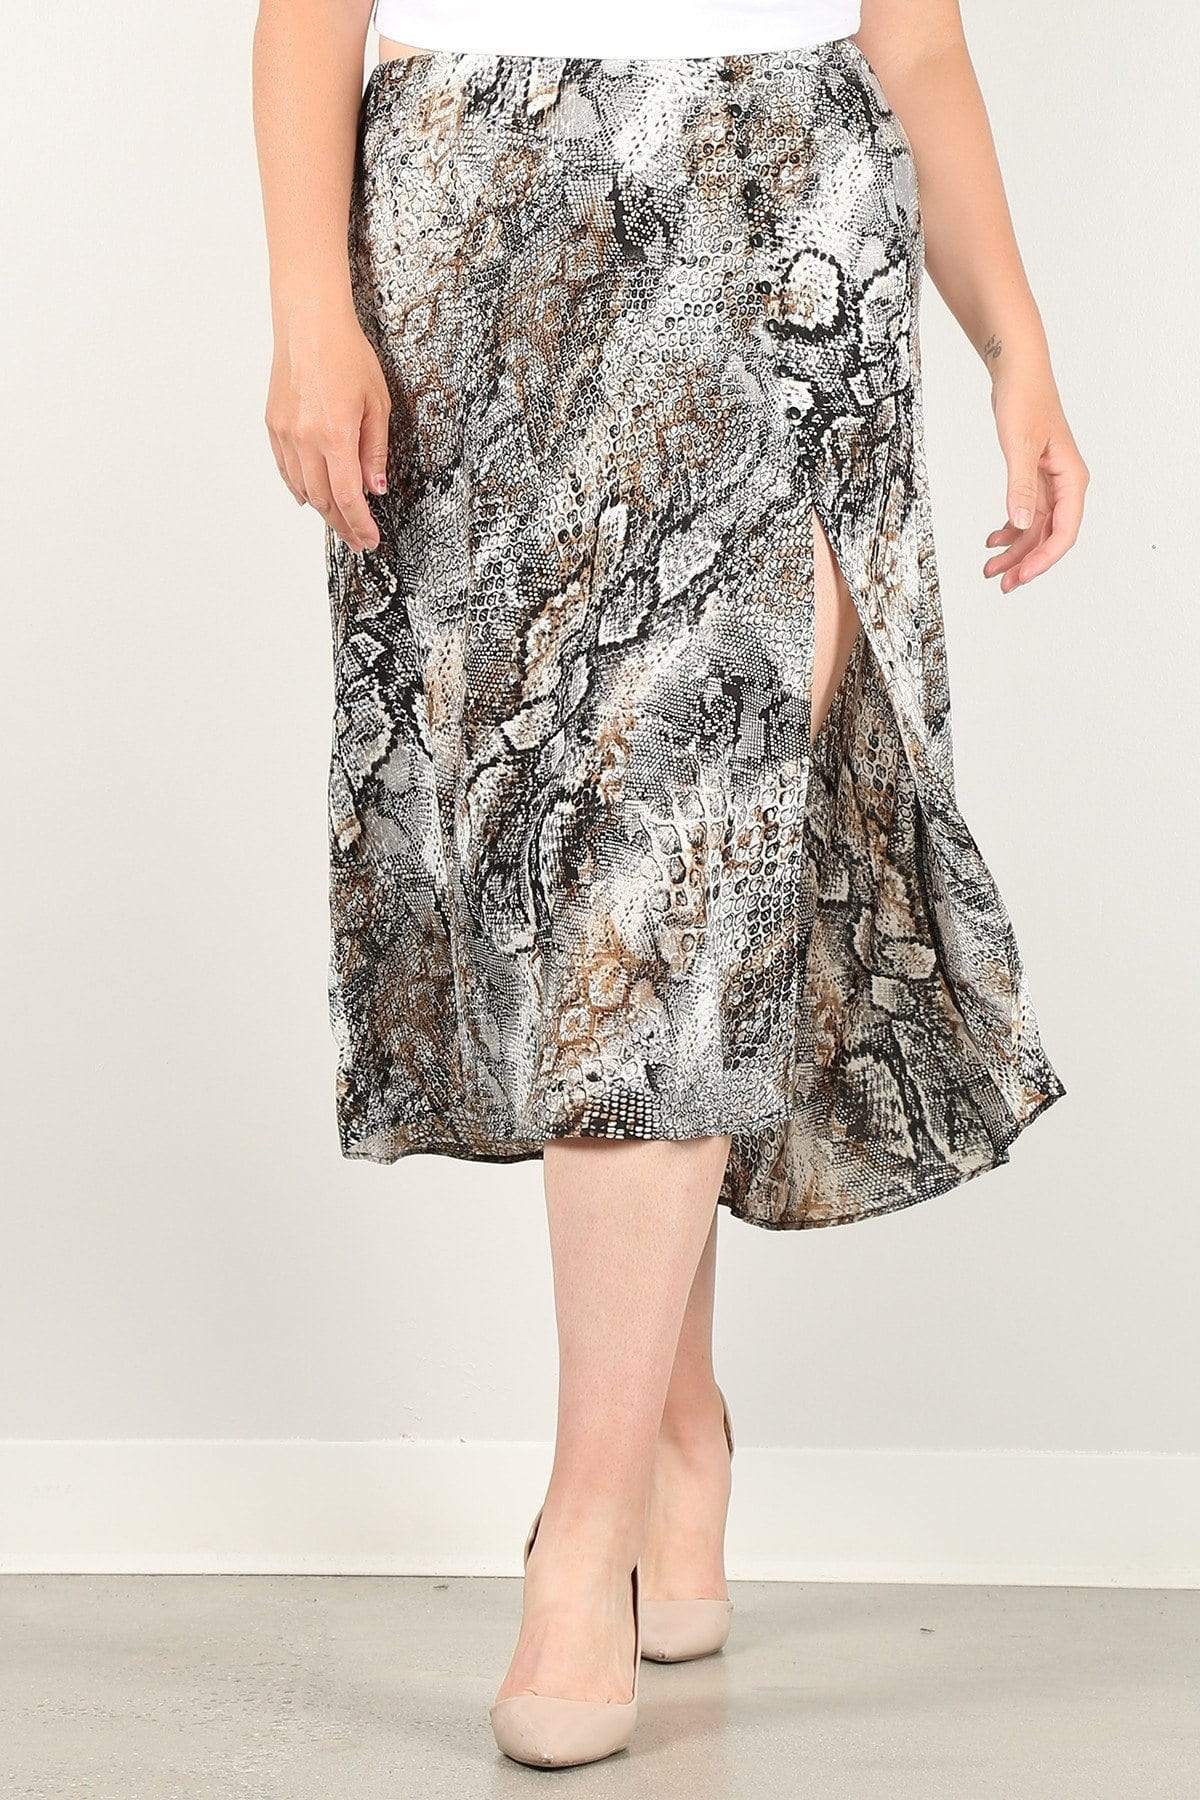 Snake Print Plus Size Midi Skirt With Side Slit - Shopping Therapy, LLC Skirt